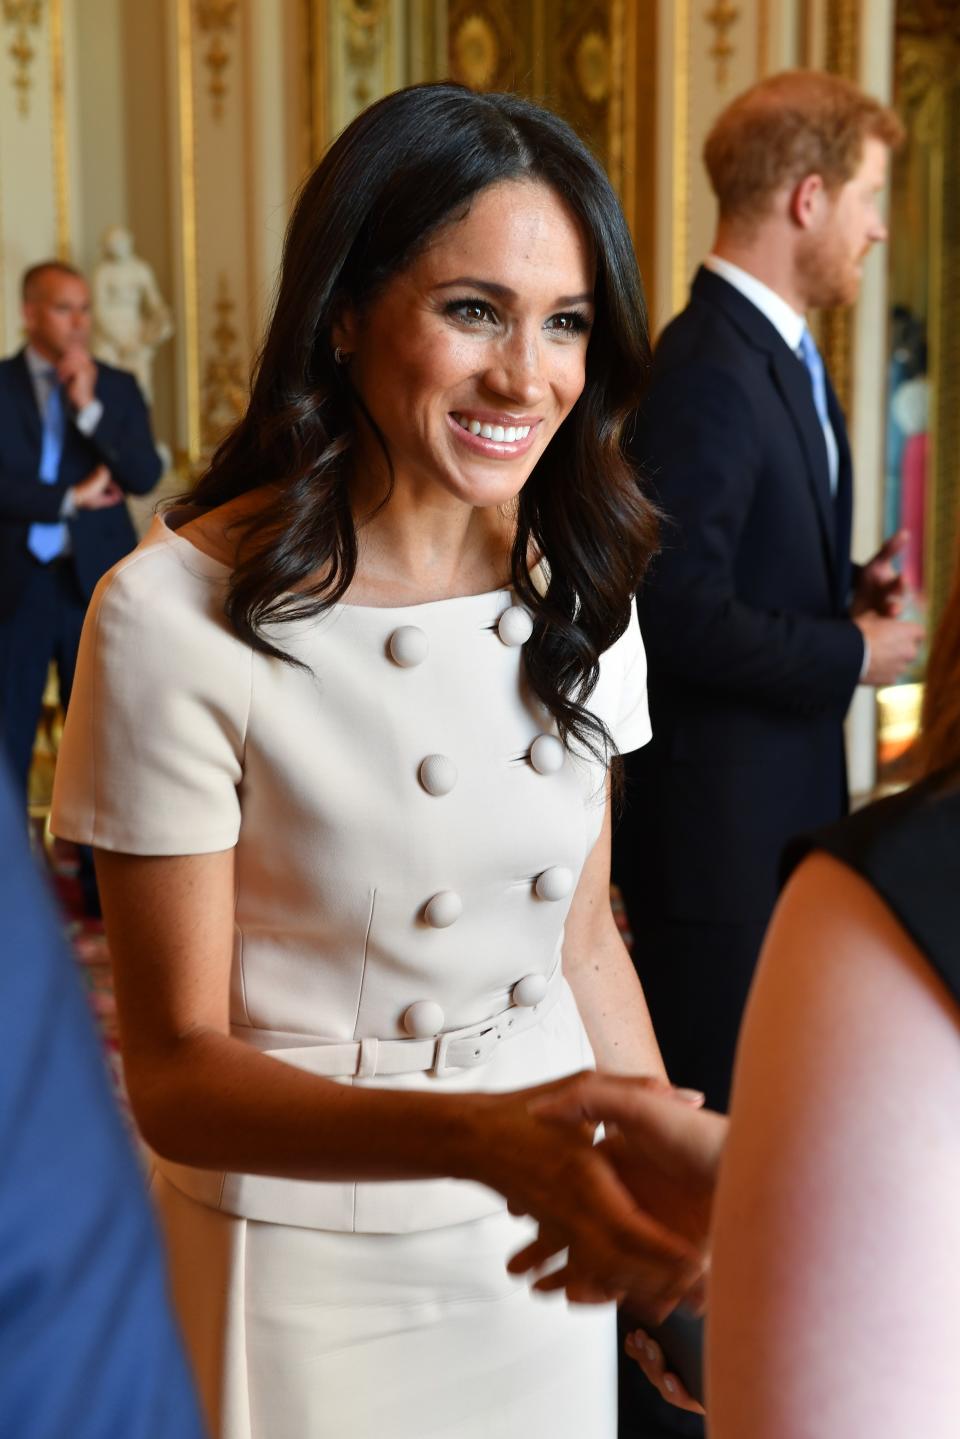 LONDON, ENGLAND - JUNE 26: Meghan, Duchess of Sussex meets guests at the Queen's Young Leaders Awards Ceremony at Buckingham Palace on June 26, 2018 in London, England. The Queen's Young Leaders Programme, now in its fourth and final year, celebrates the achievements of young people from across the Commonwealth working to improve the lives of people across a diverse range of issues including supporting people living with mental health problems, access to education, promoting gender equality, food scarcity and climate change.  (Photo by John Stillwell - WPA Pool/Getty Images)